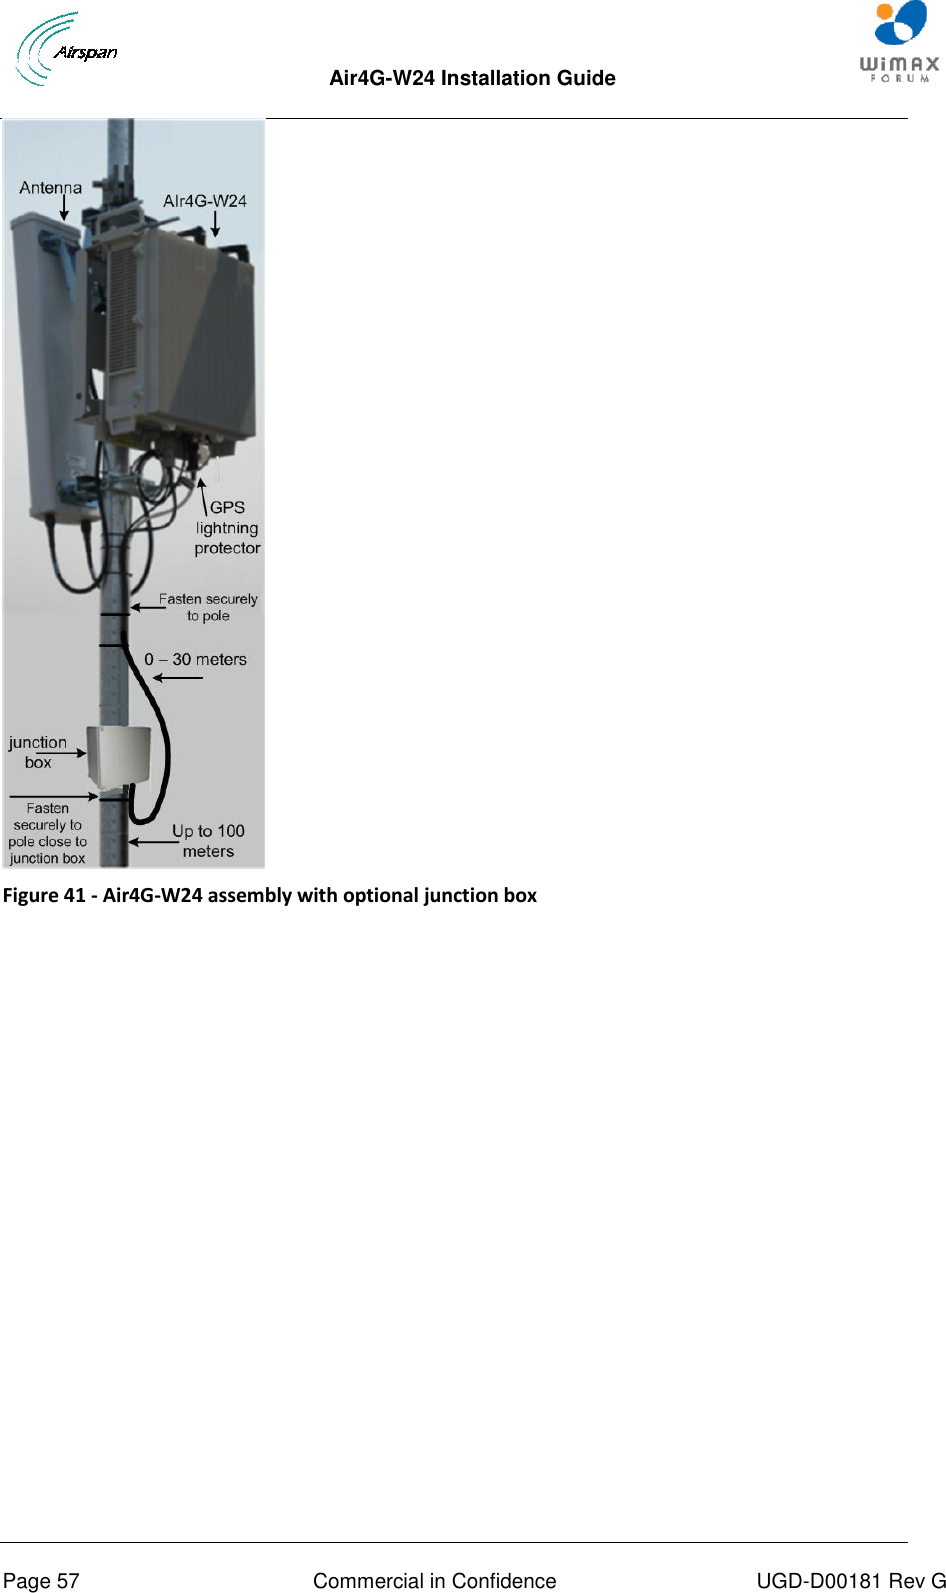  Air4G-W24 Installation Guide     Page 57  Commercial in Confidence  UGD-D00181 Rev G  Figure 41 - Air4G-W24 assembly with optional junction box  